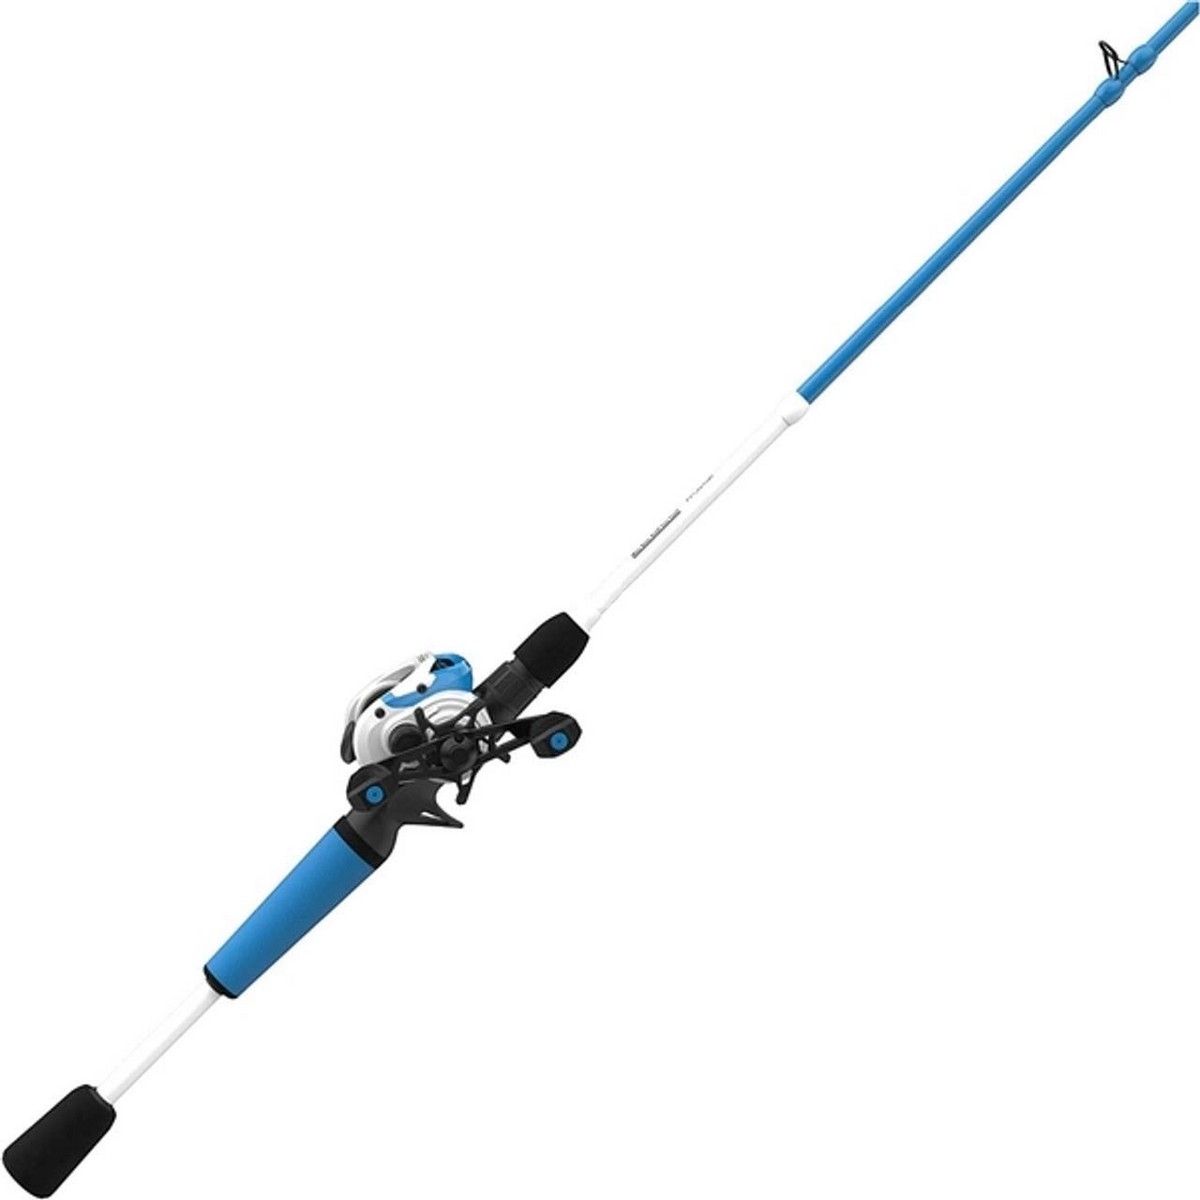 Fishing Rods & Poles, 12ft to 20ft Rods Available